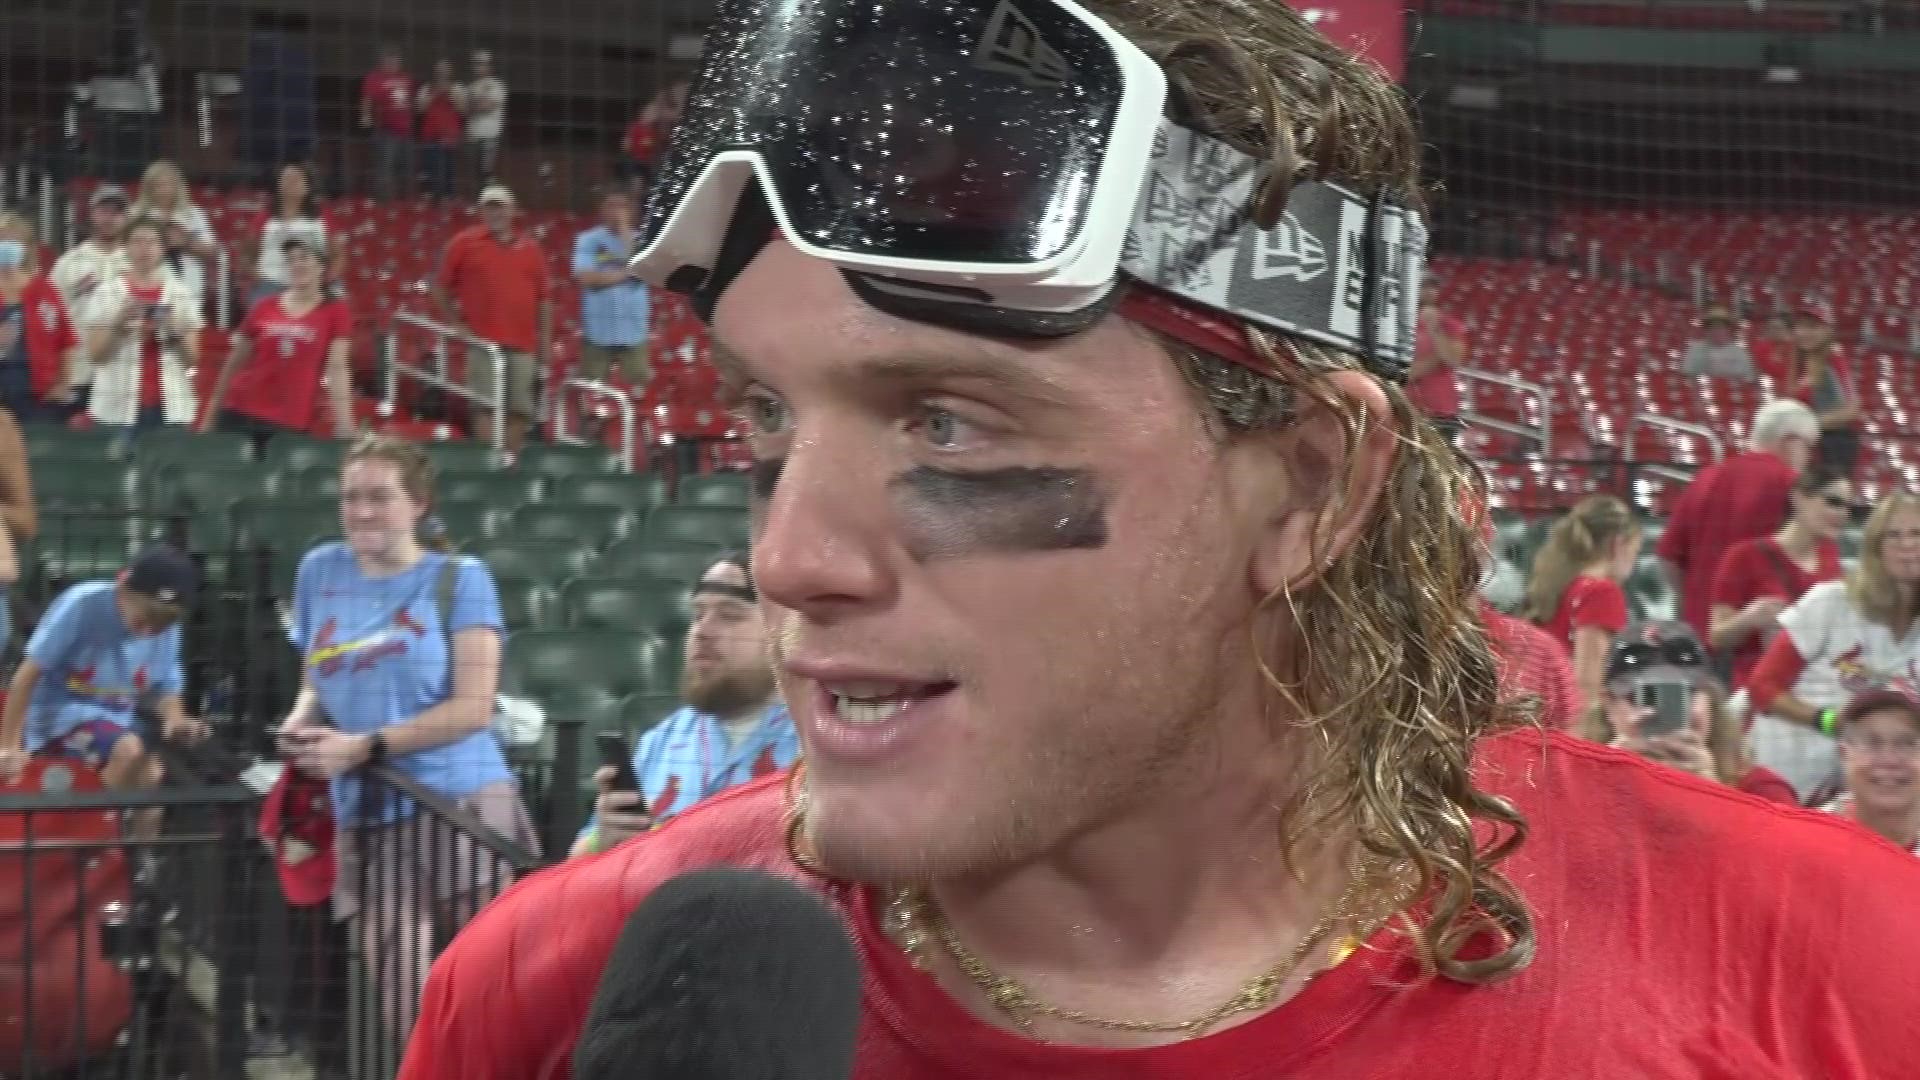 Harrison Bader, one of the hottest Cardinals during the streak, compared earning the chance to play in the postseason to eating the first bite of a really good steak